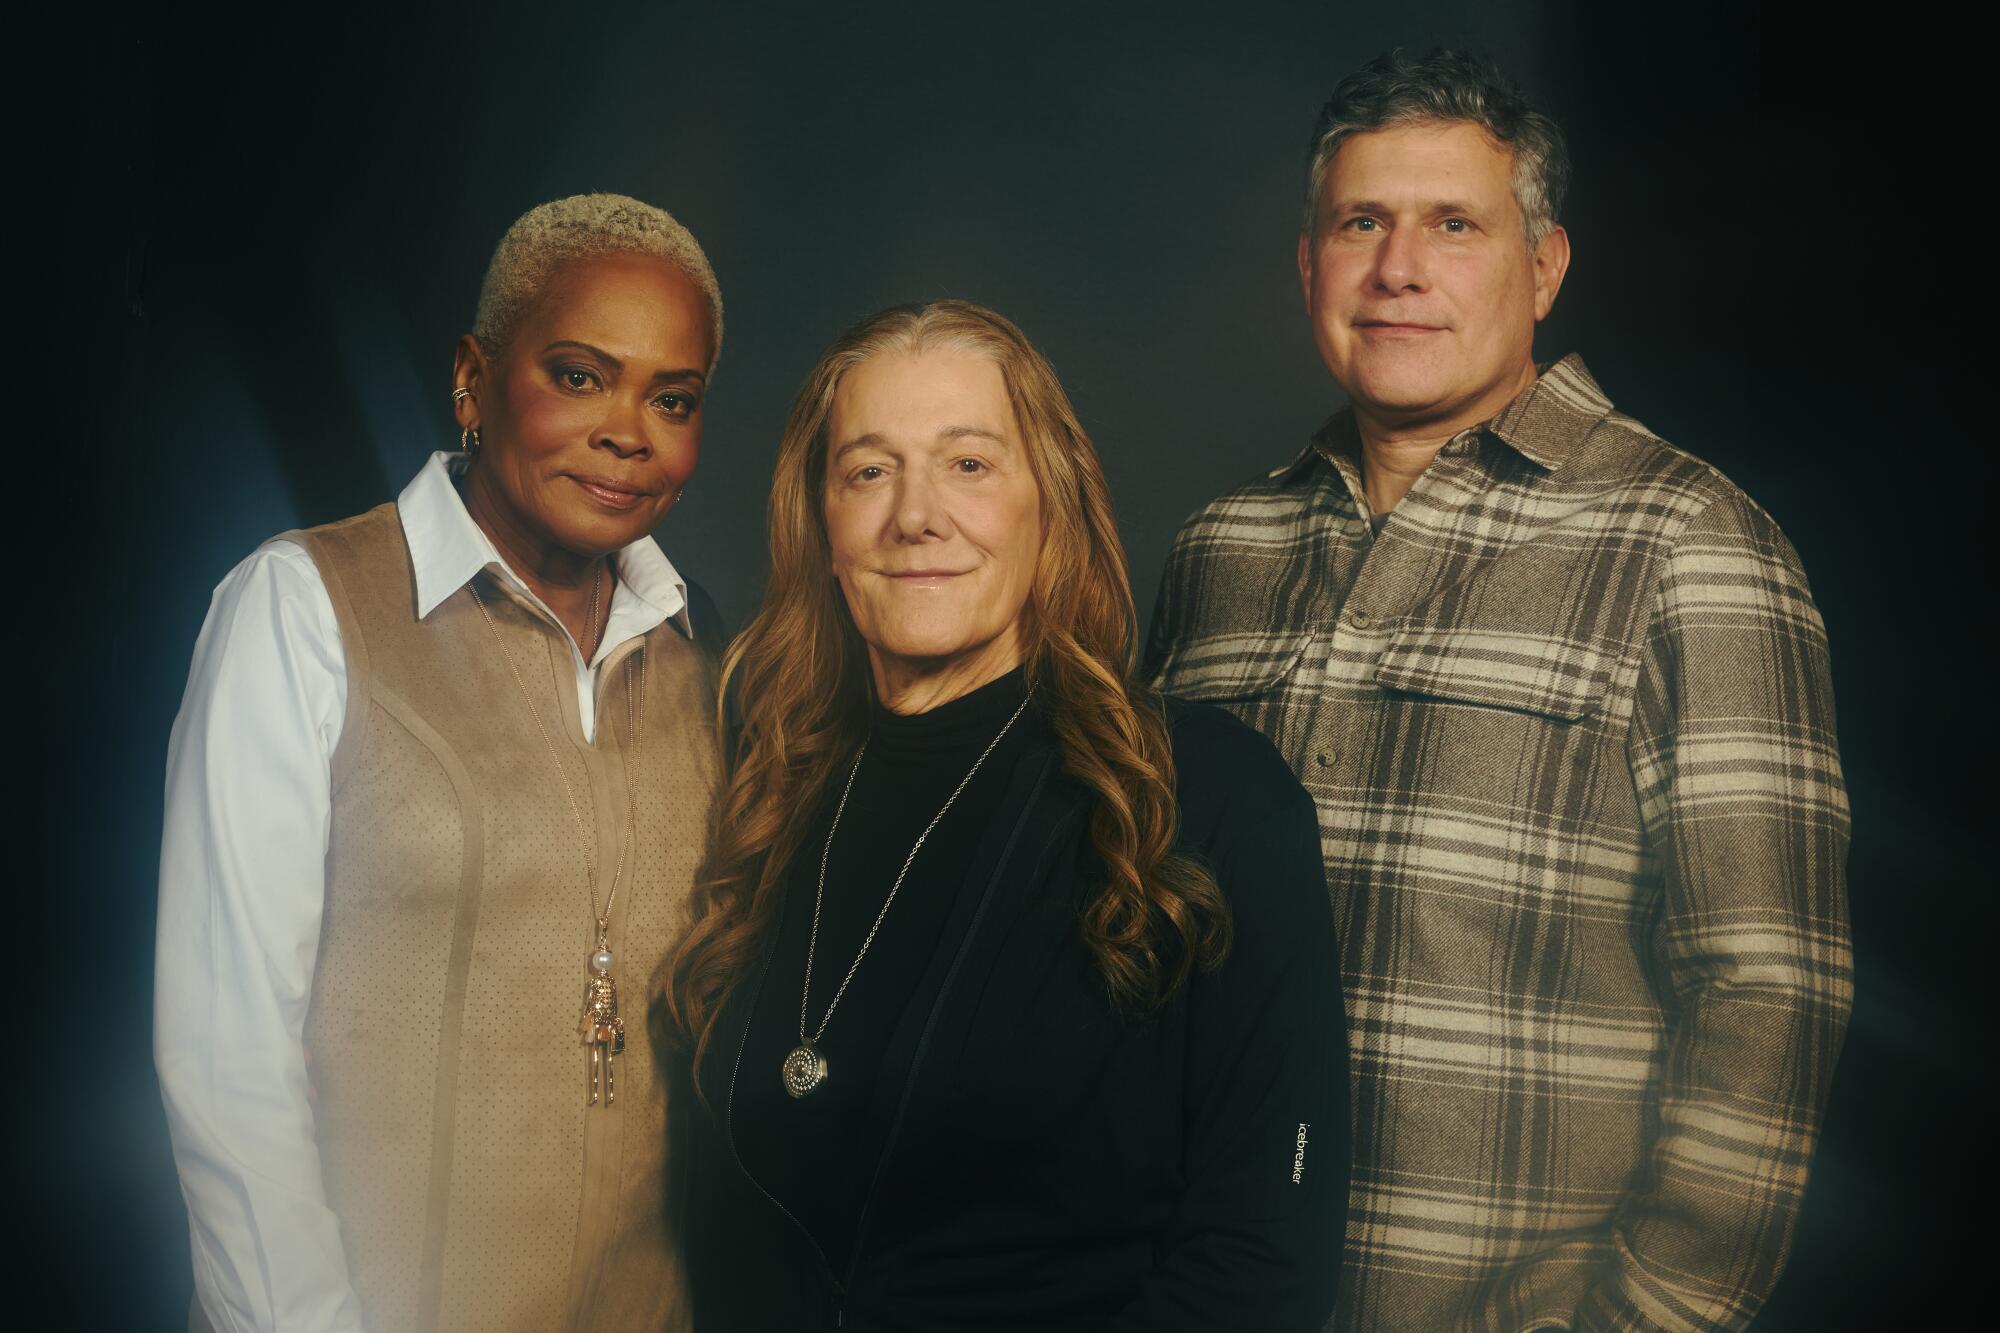 Three people pose for a portrait.